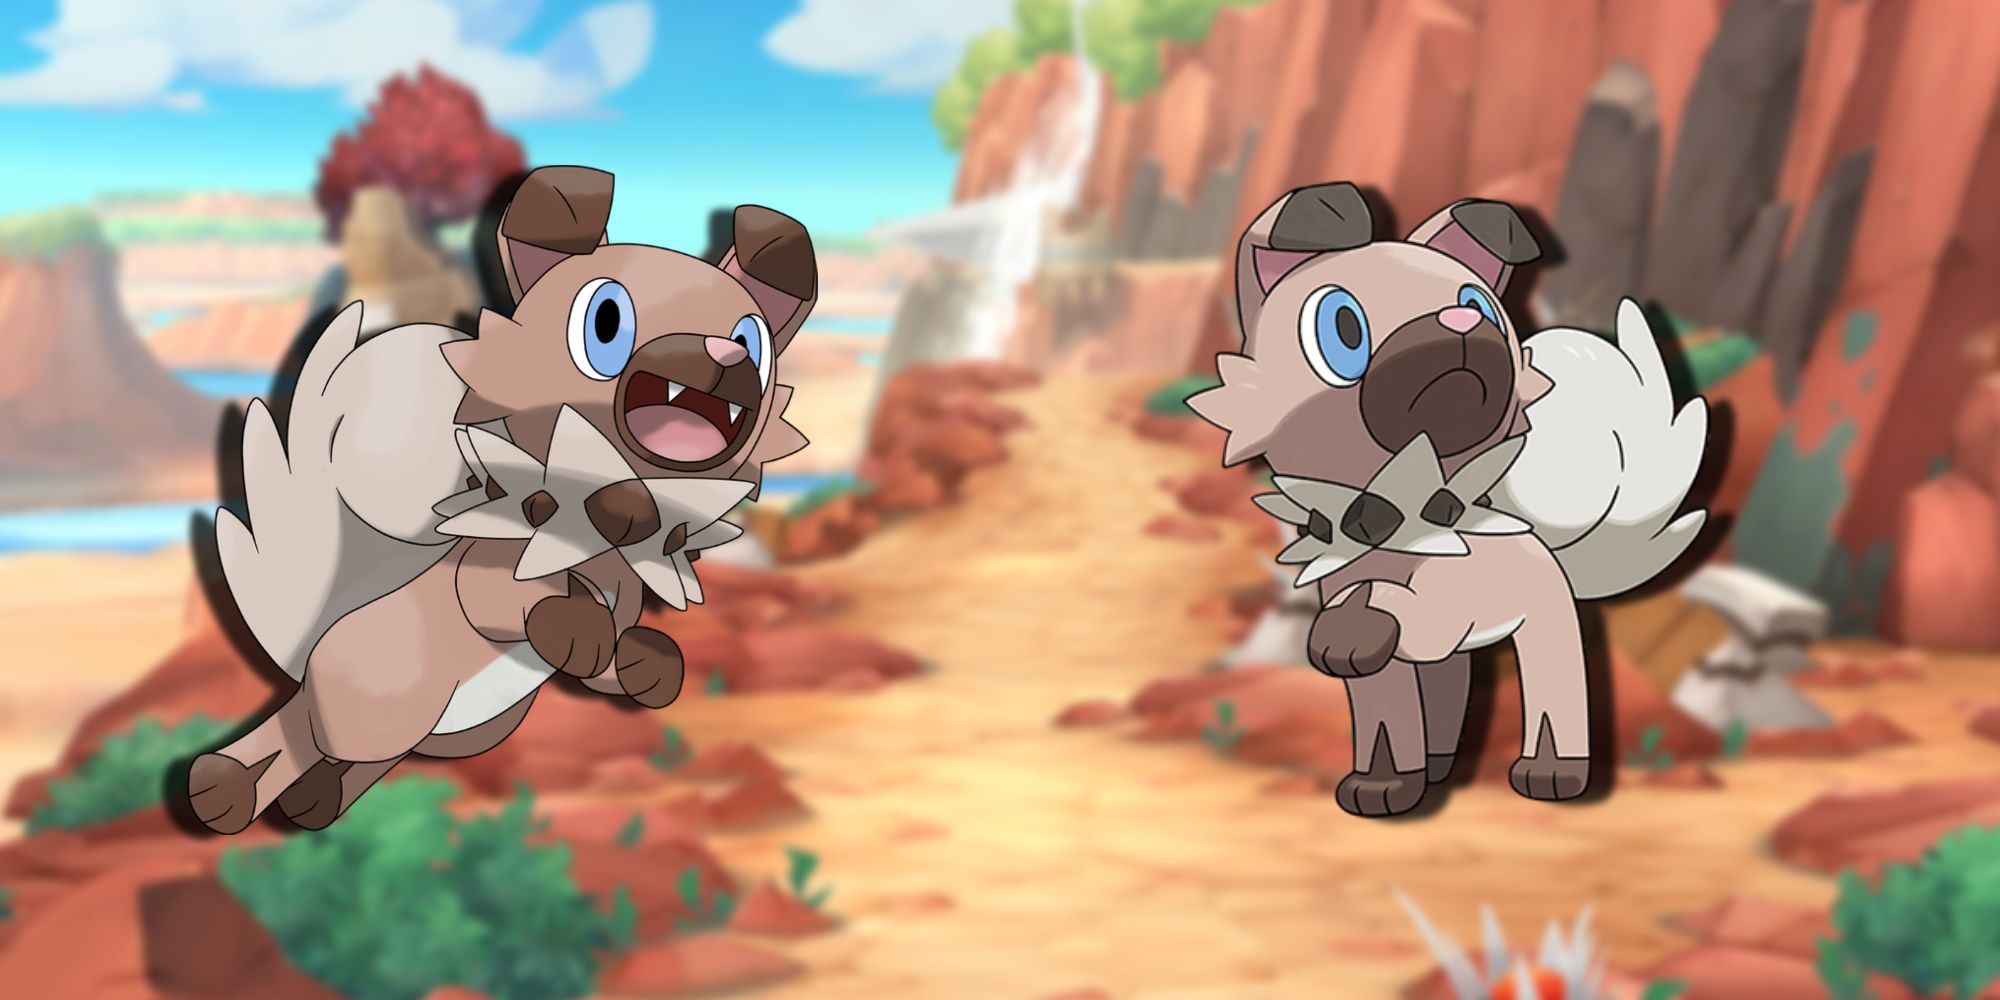 The pokemon Rockruff is a cute little puppy but could likely kill a human